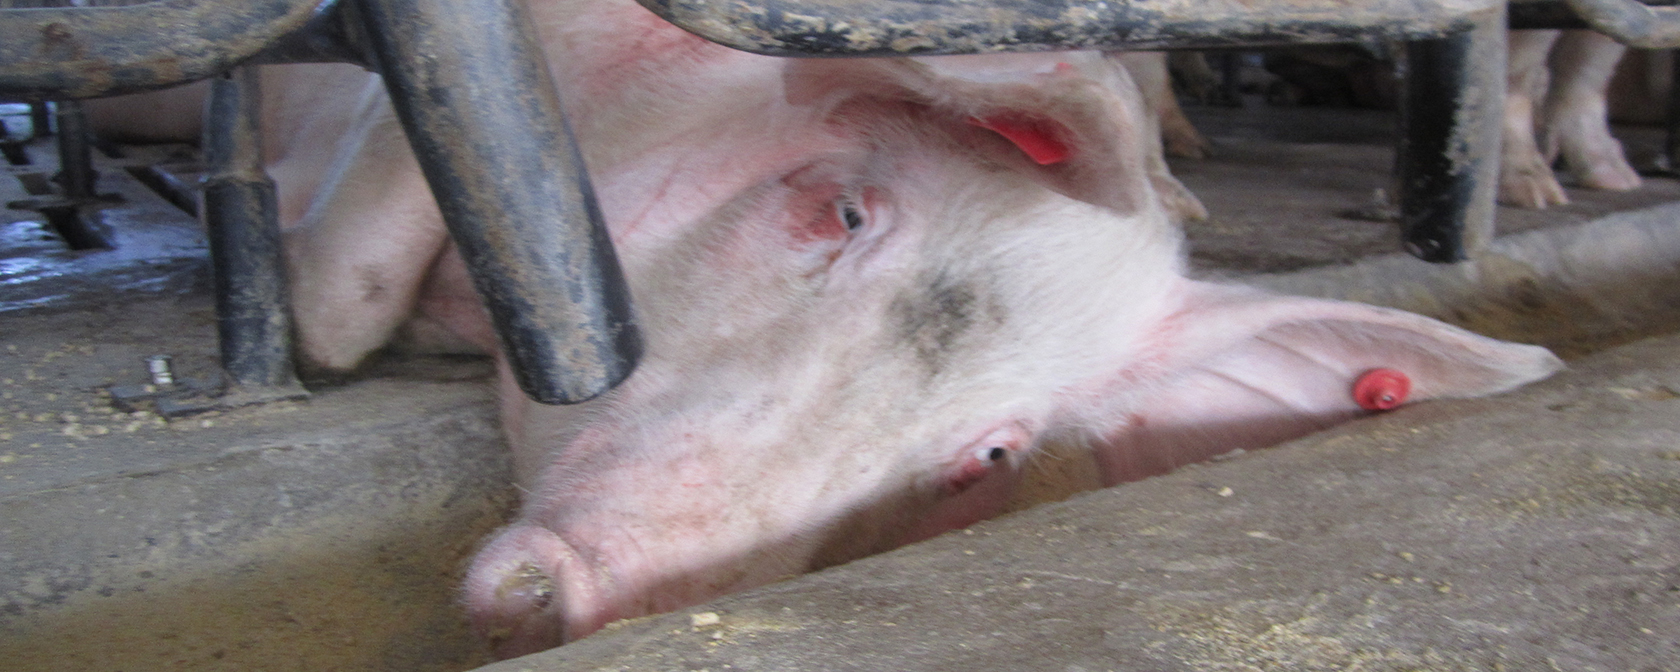 USDA Secretary’s support for factory farming cruelty is an insult to animals and voters